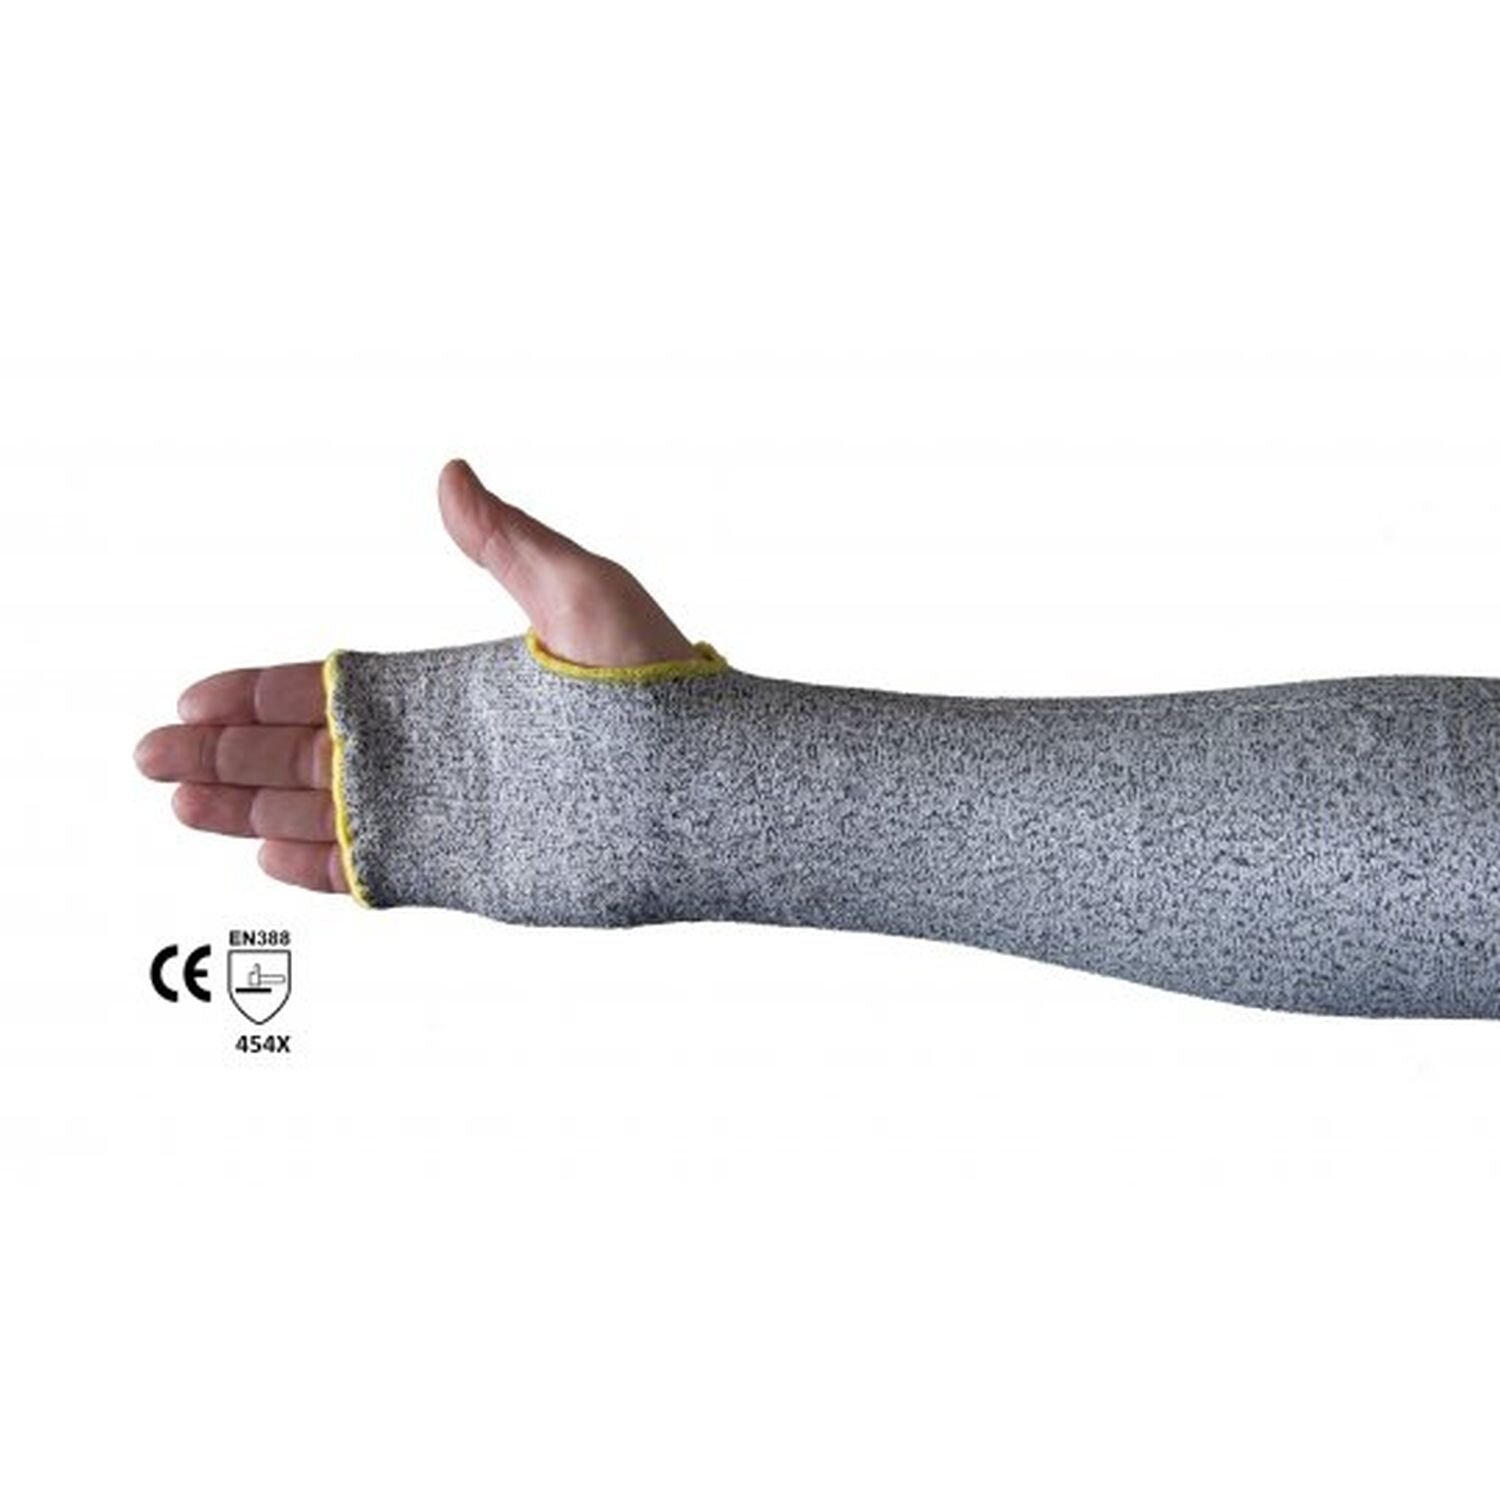 Cut 5 Sleeve/Wrist & Fore-Arm Protection